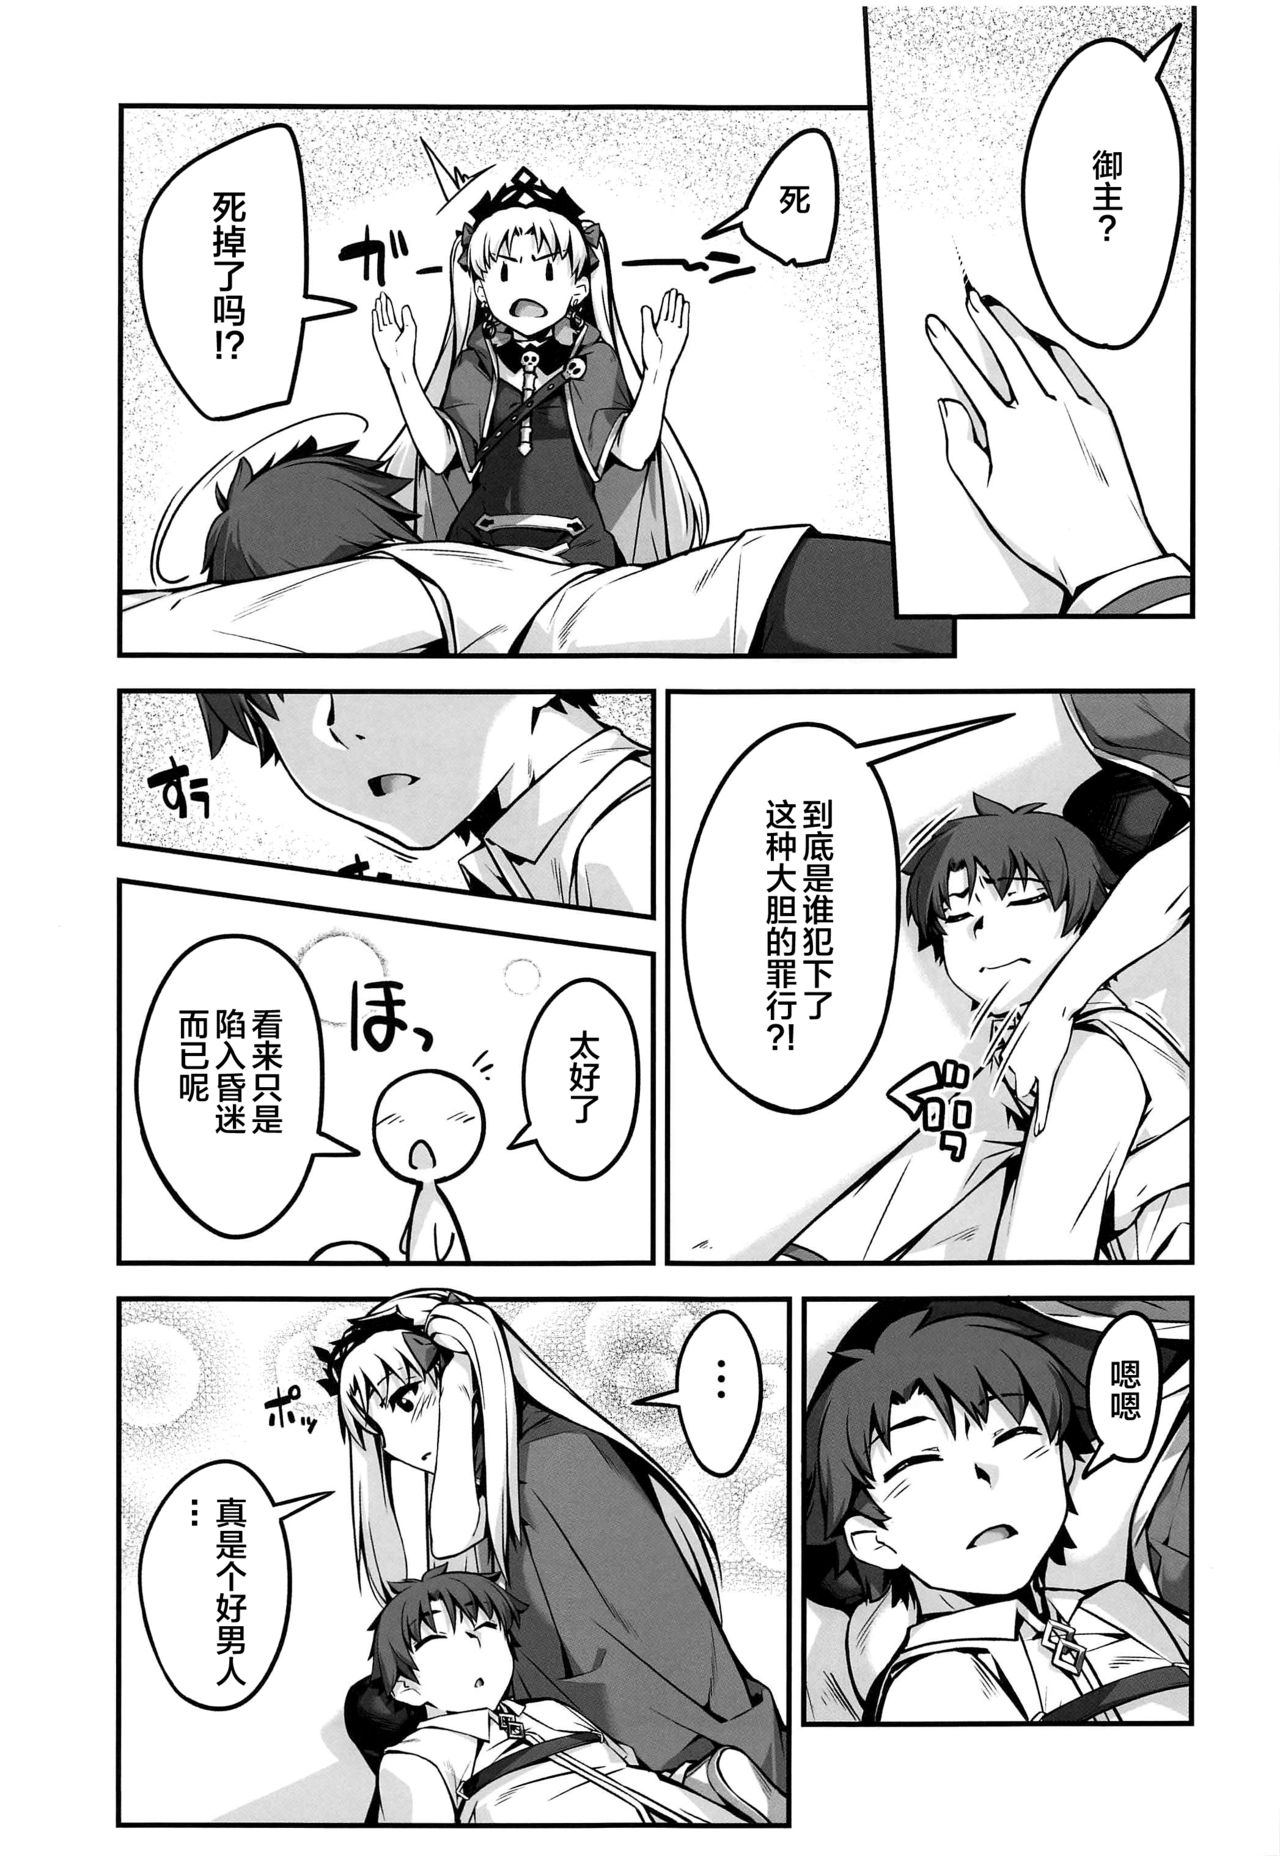 (C97) [Kansyouyou Marmotte (Mr.Lostman)] Hiroigui. (Fate/Grand Order) [Chinese] [黎欧×新桥月白日语社] page 4 full